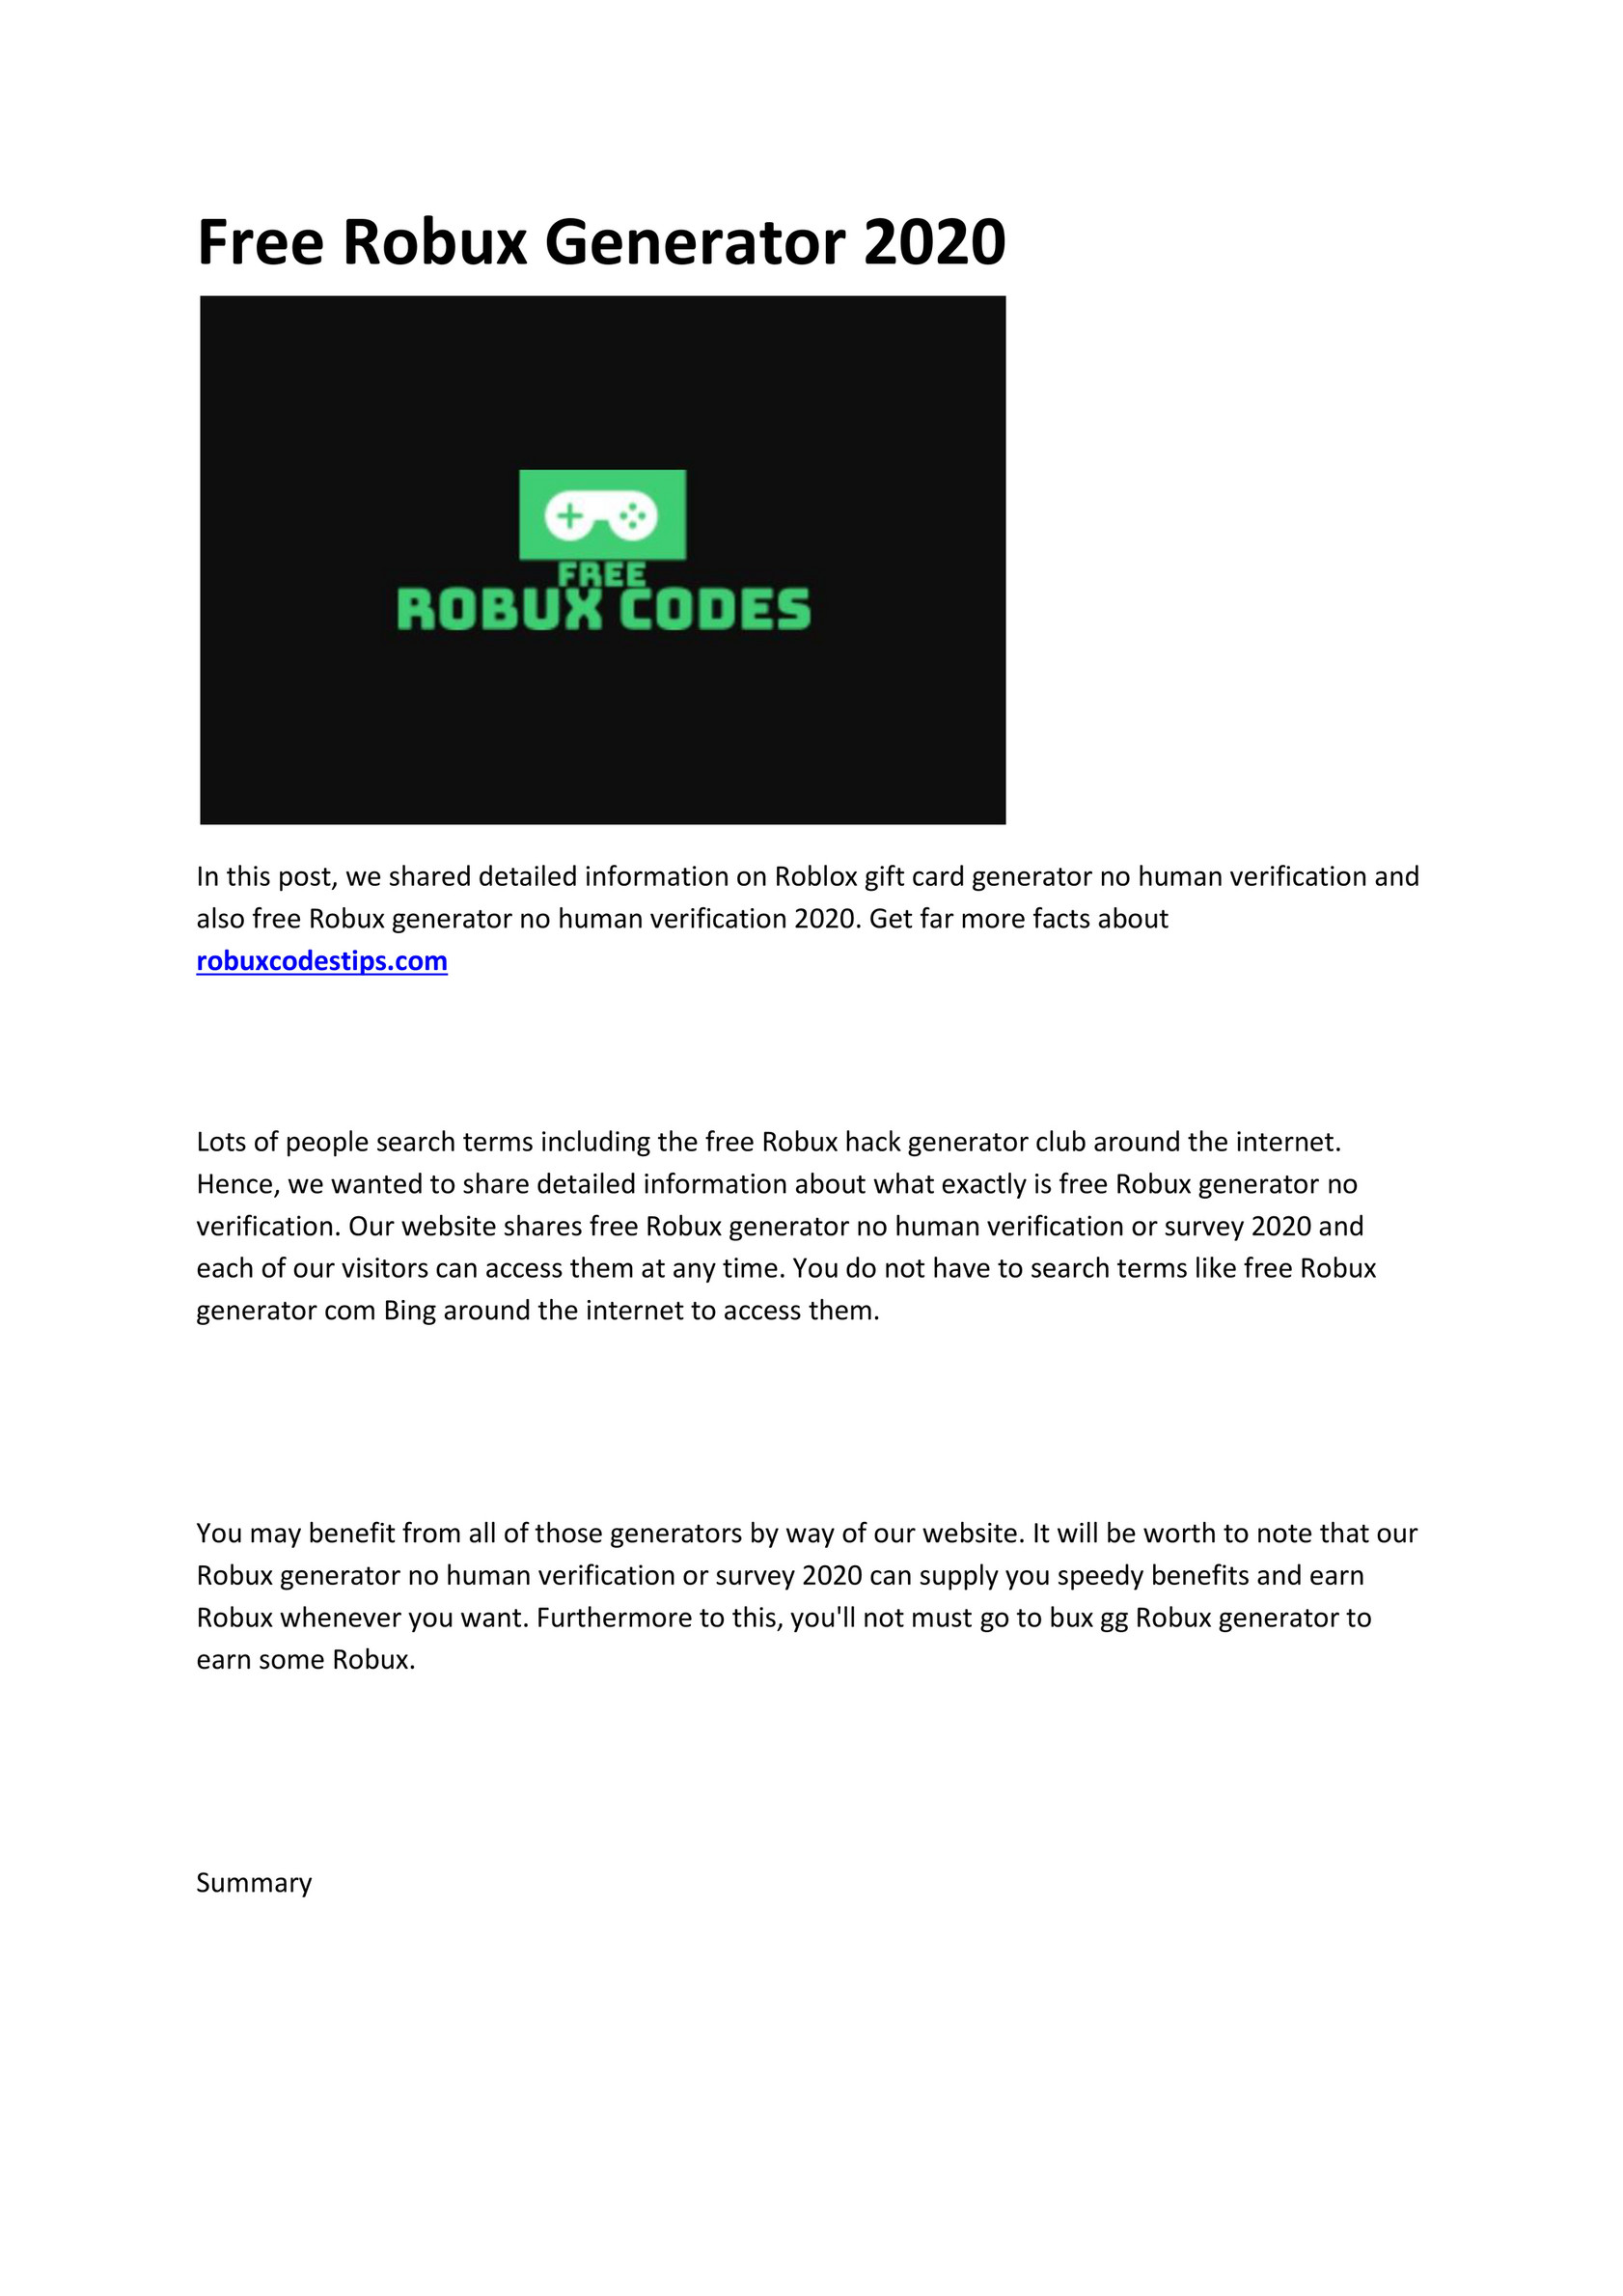 My Publications Free Robux Codes Generator 2020 5k Free Rubox Daily Page 2 3 Created With Publitas Com - ggrobux.gg